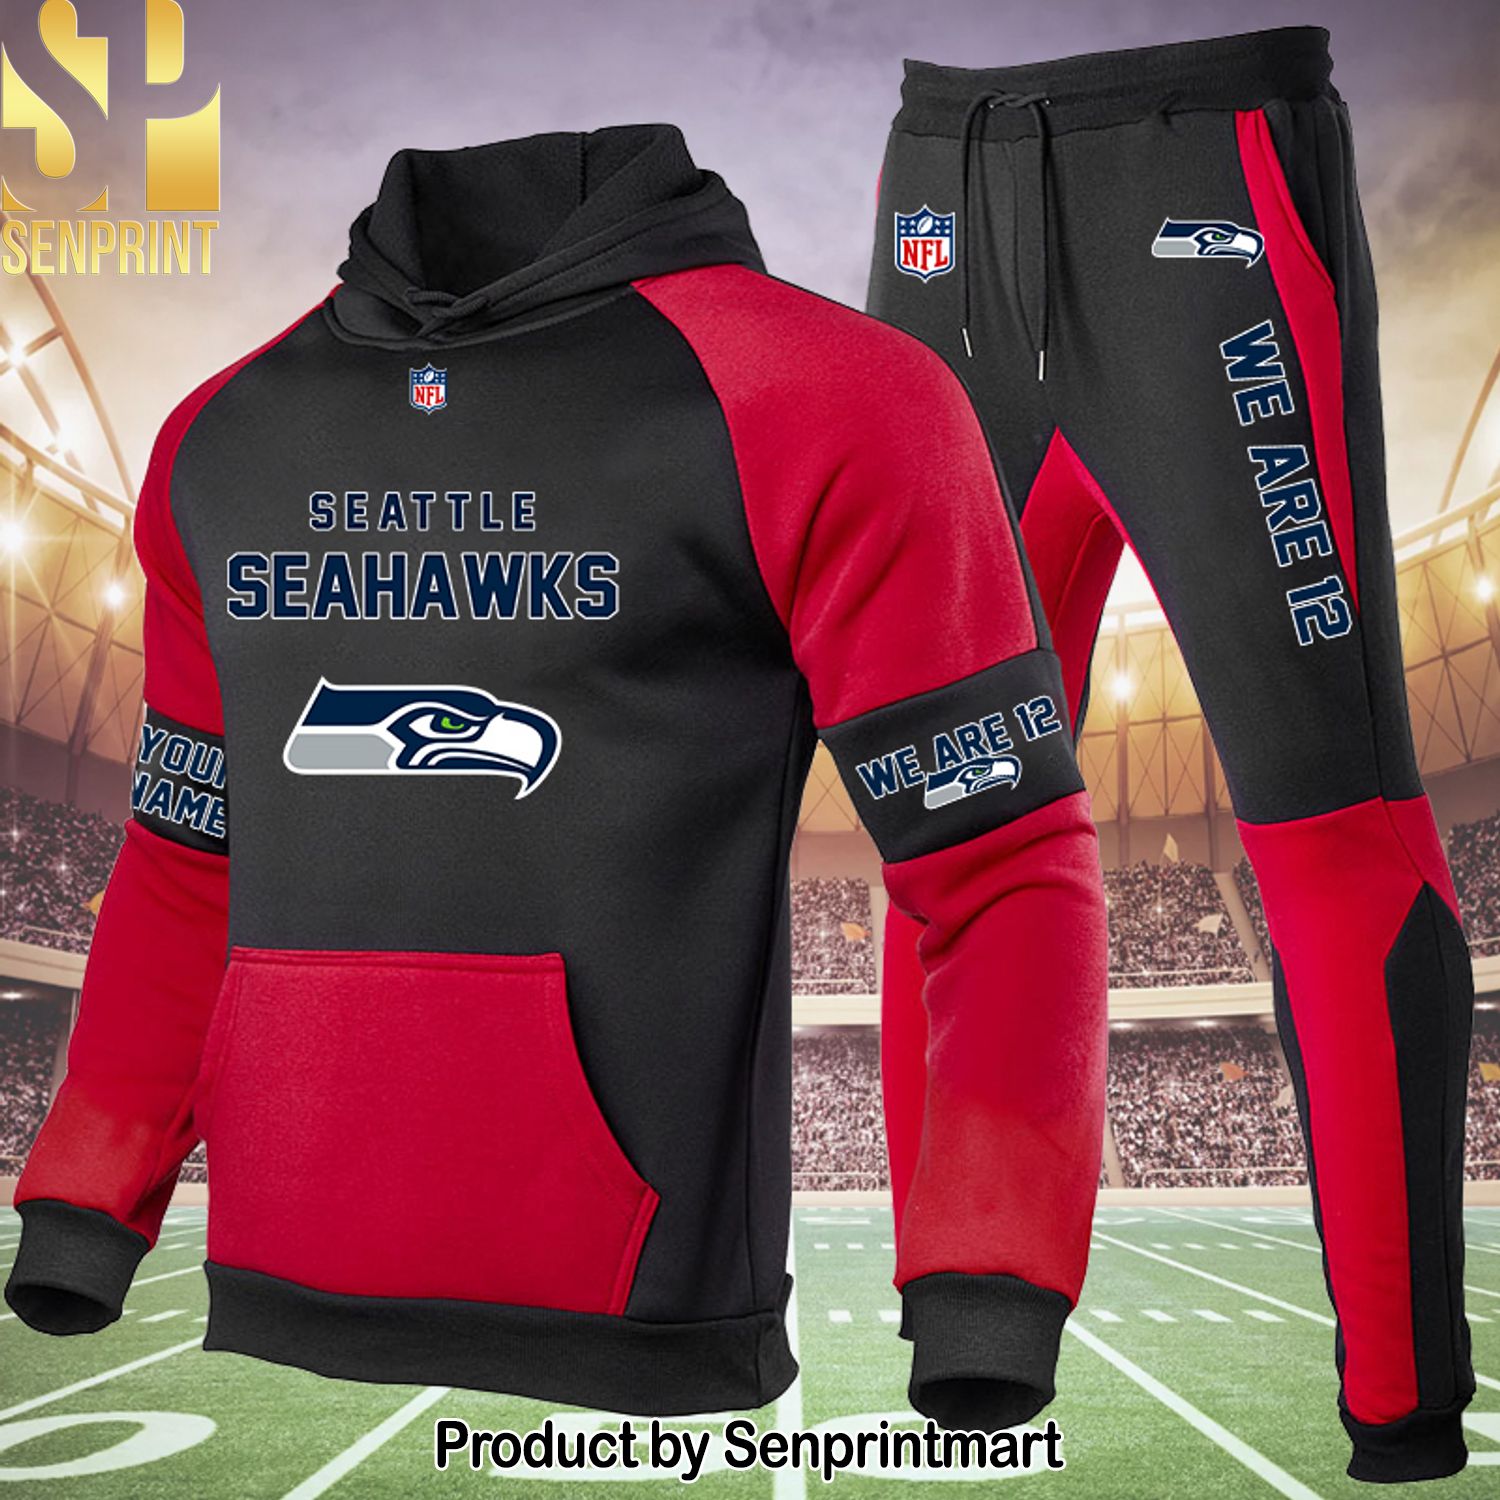 Seattle Seahawks Awesome Outfit Shirt and Pants